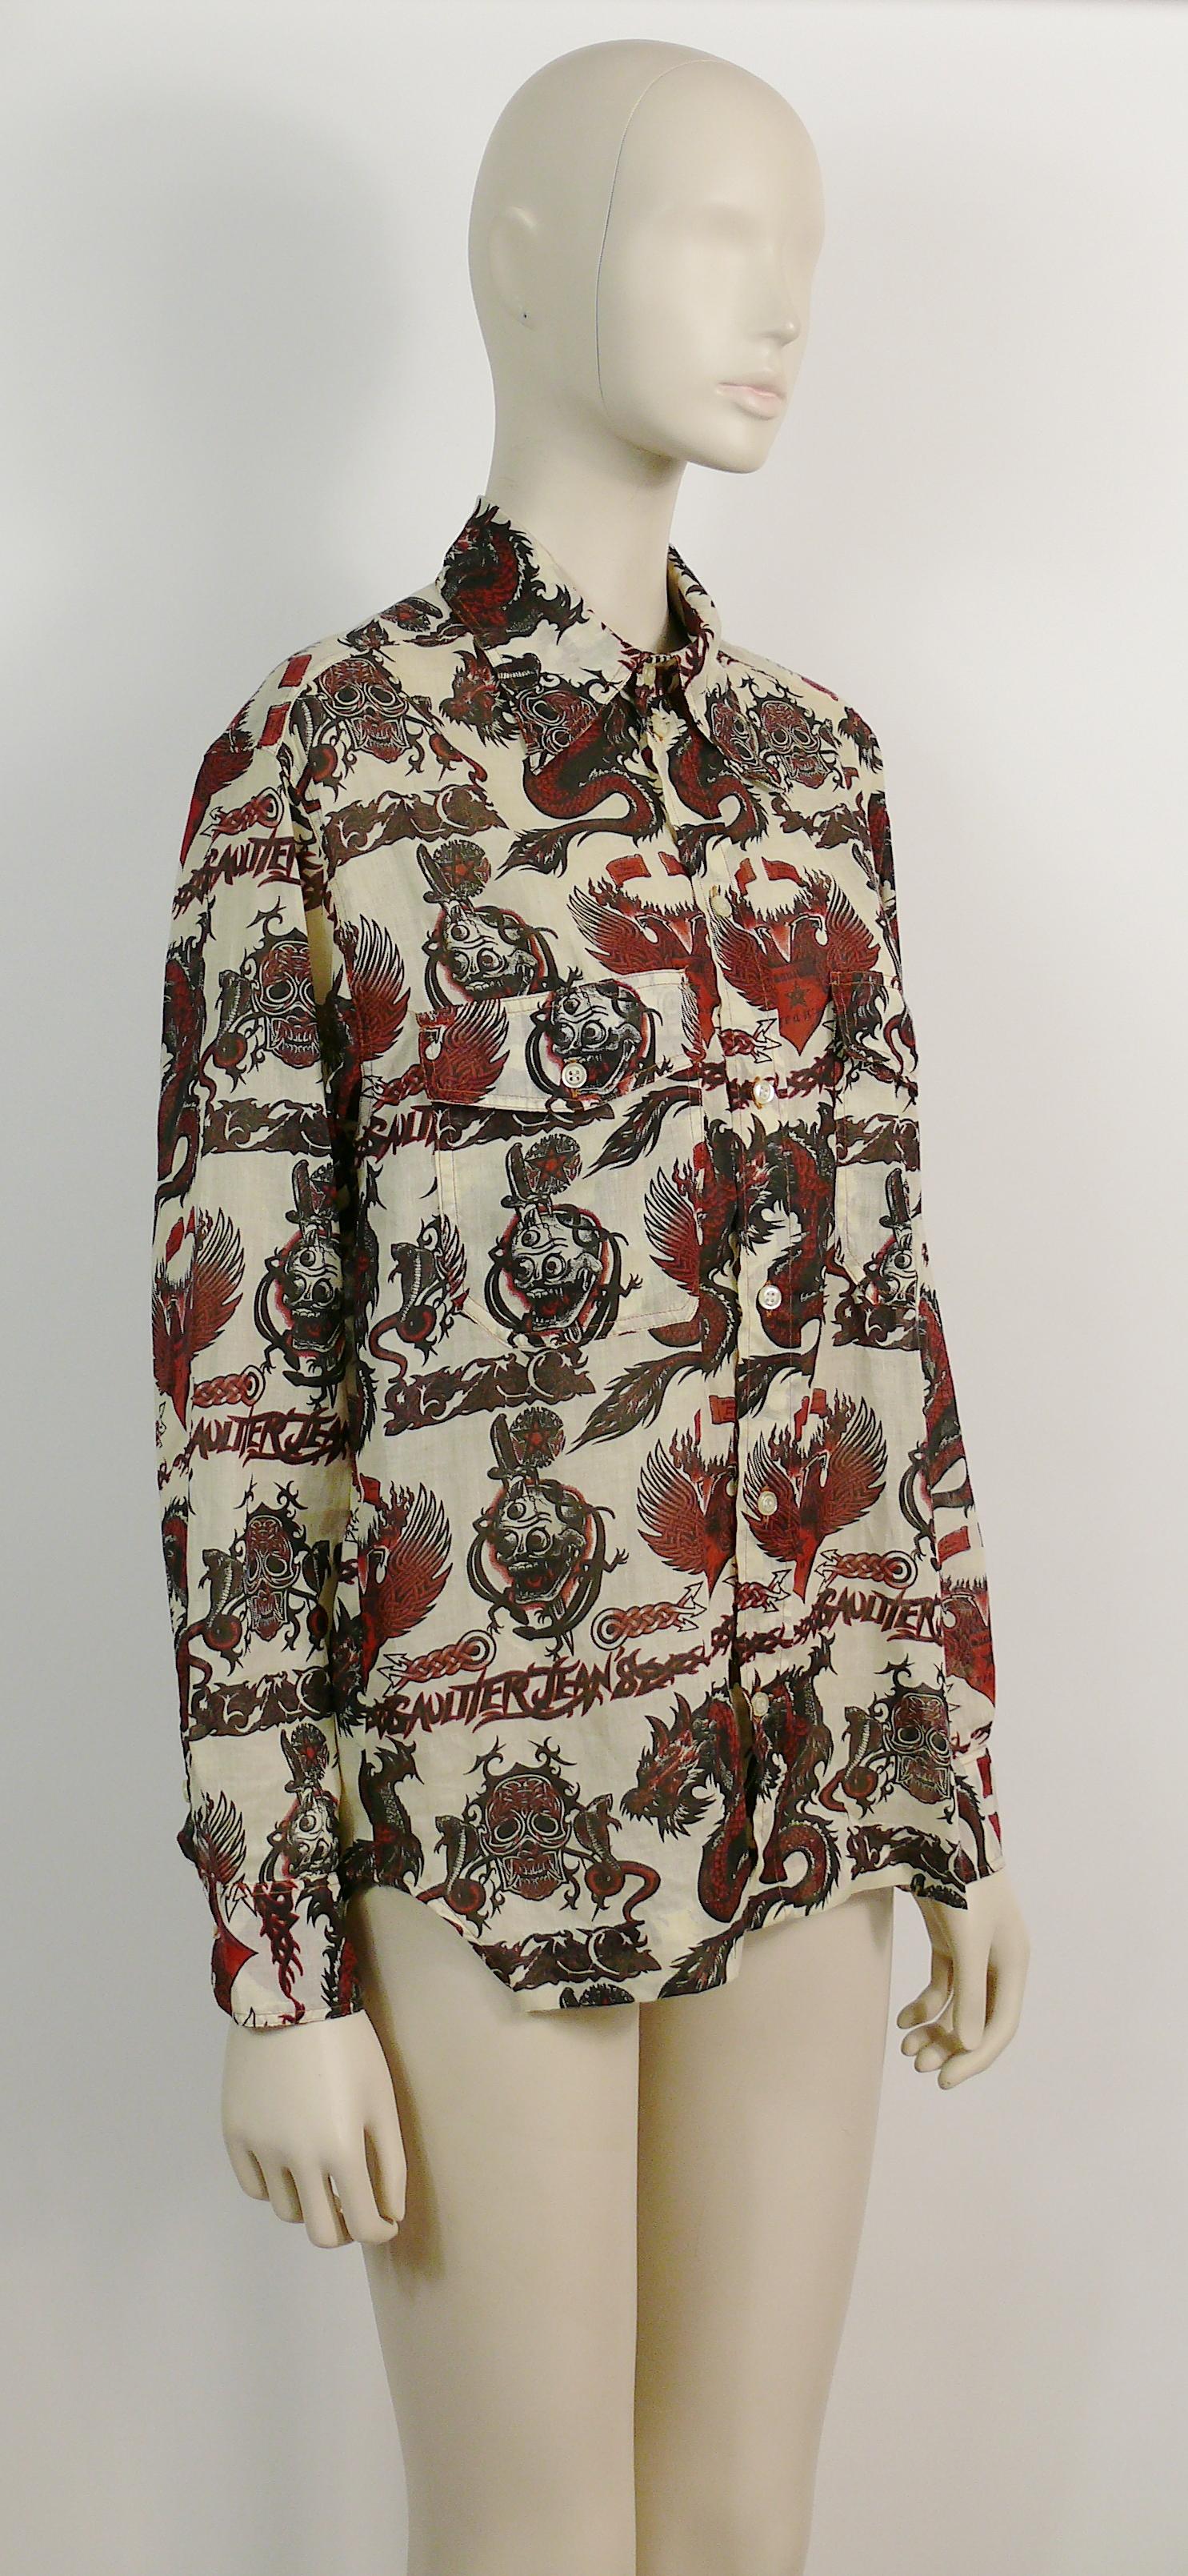 JEAN PAUL GAULTIER vintage men's shirt featuring tattoo print of barbed wire 'GAULTIER JEAN'S